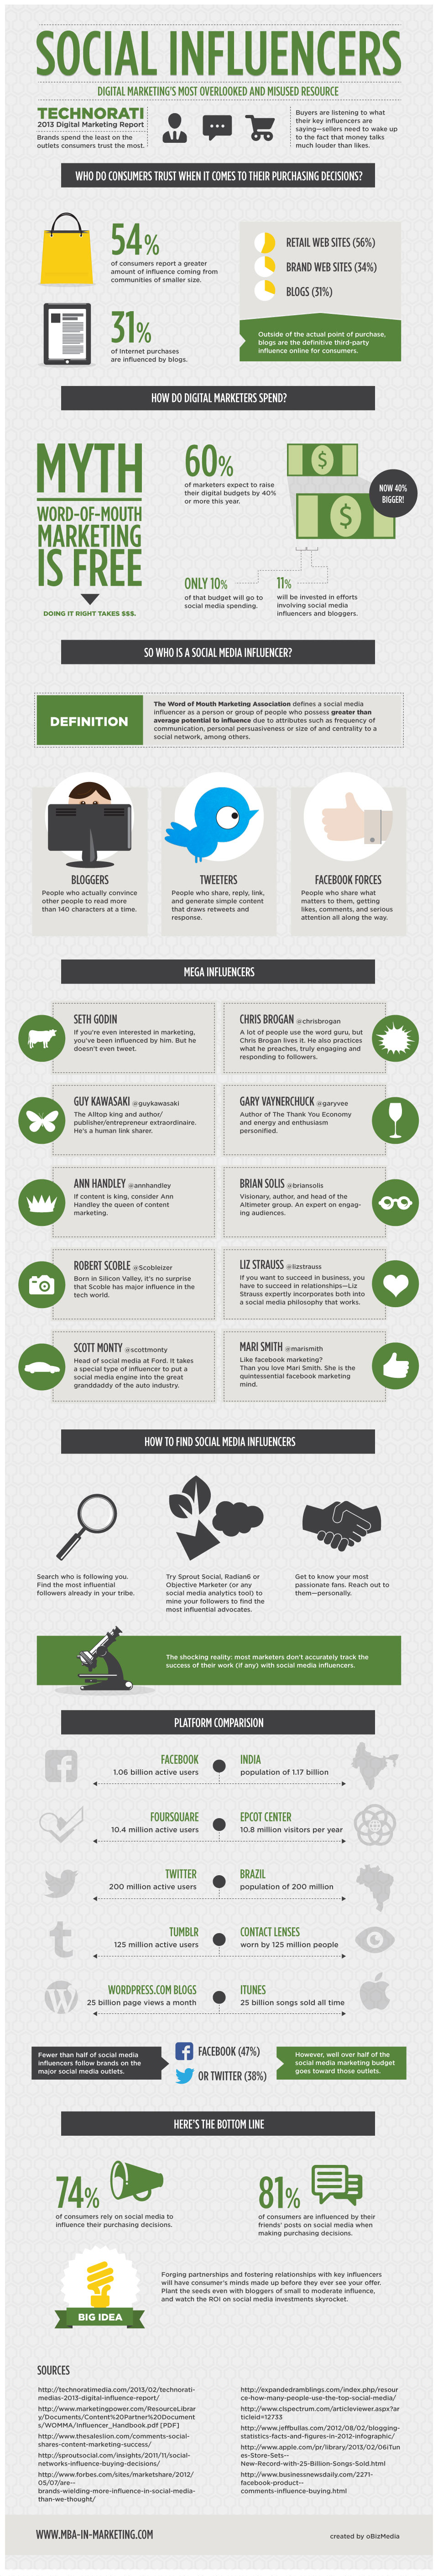 Social Influencers Infographic - Kill the promotional message and provide value to your target customers